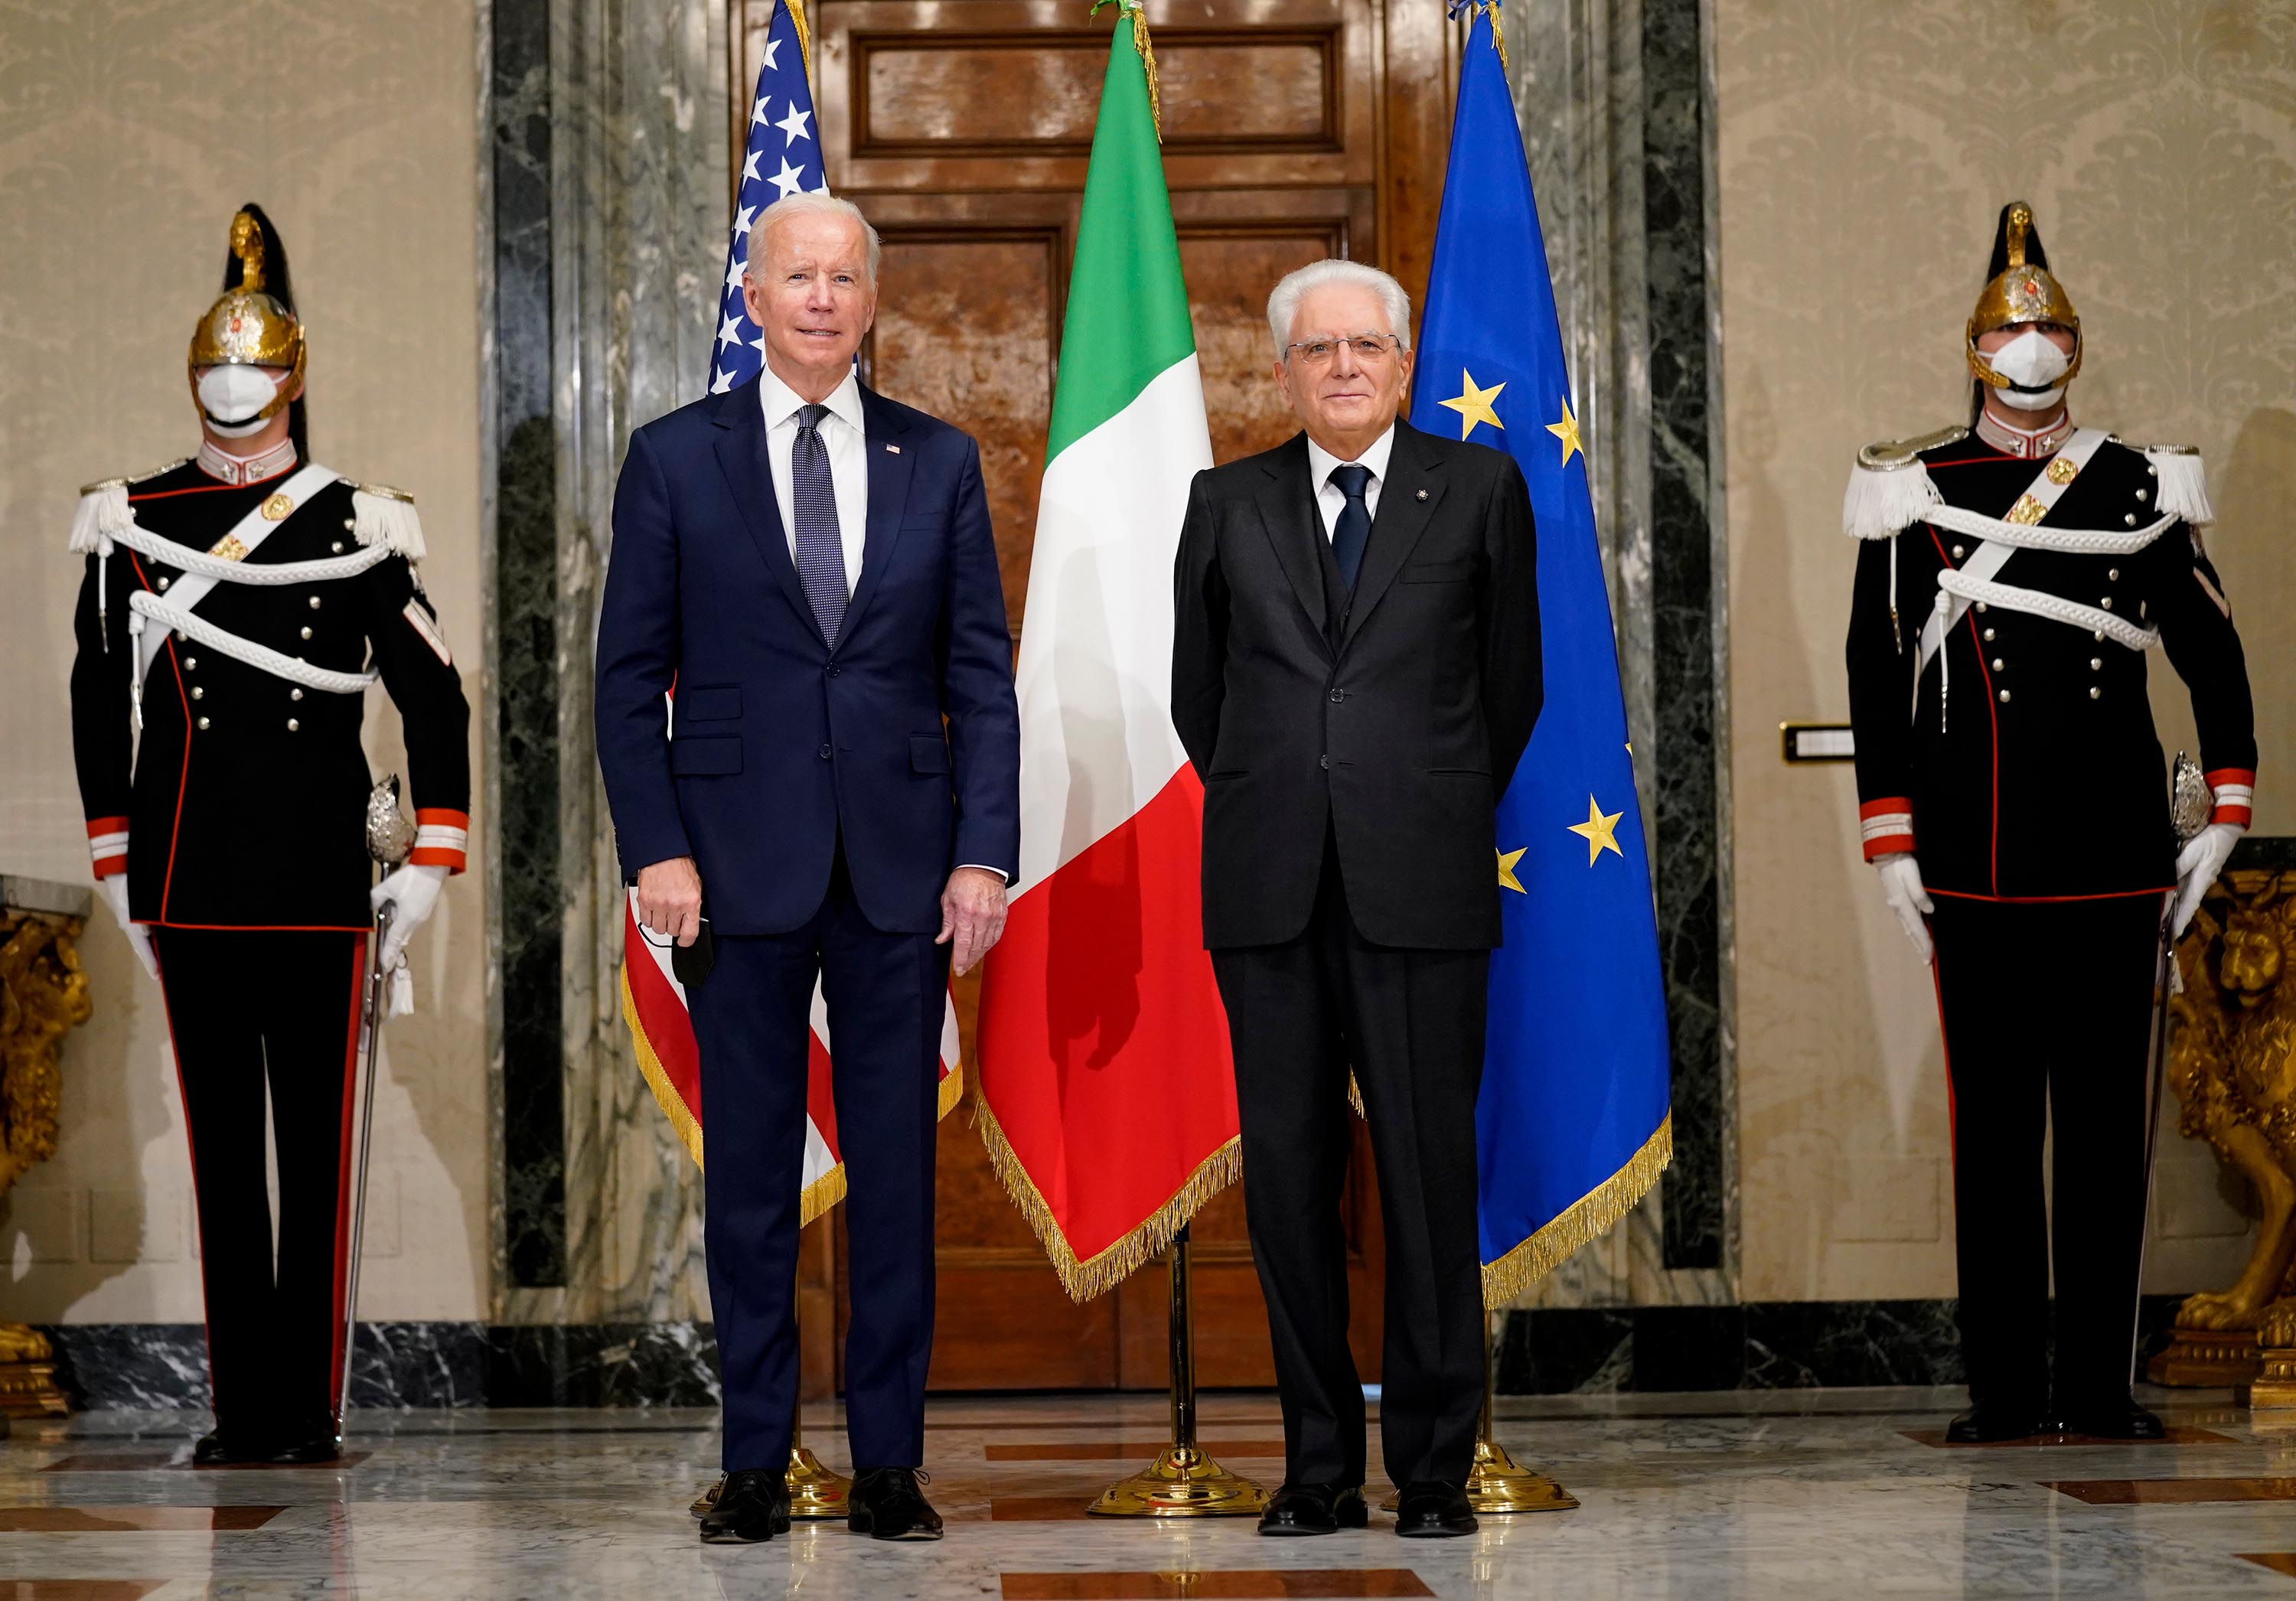 Biden, left, poses with Italy's President Sergio Mattarella during a formal greeting at the Quirinale Palace in Rome, on Friday.